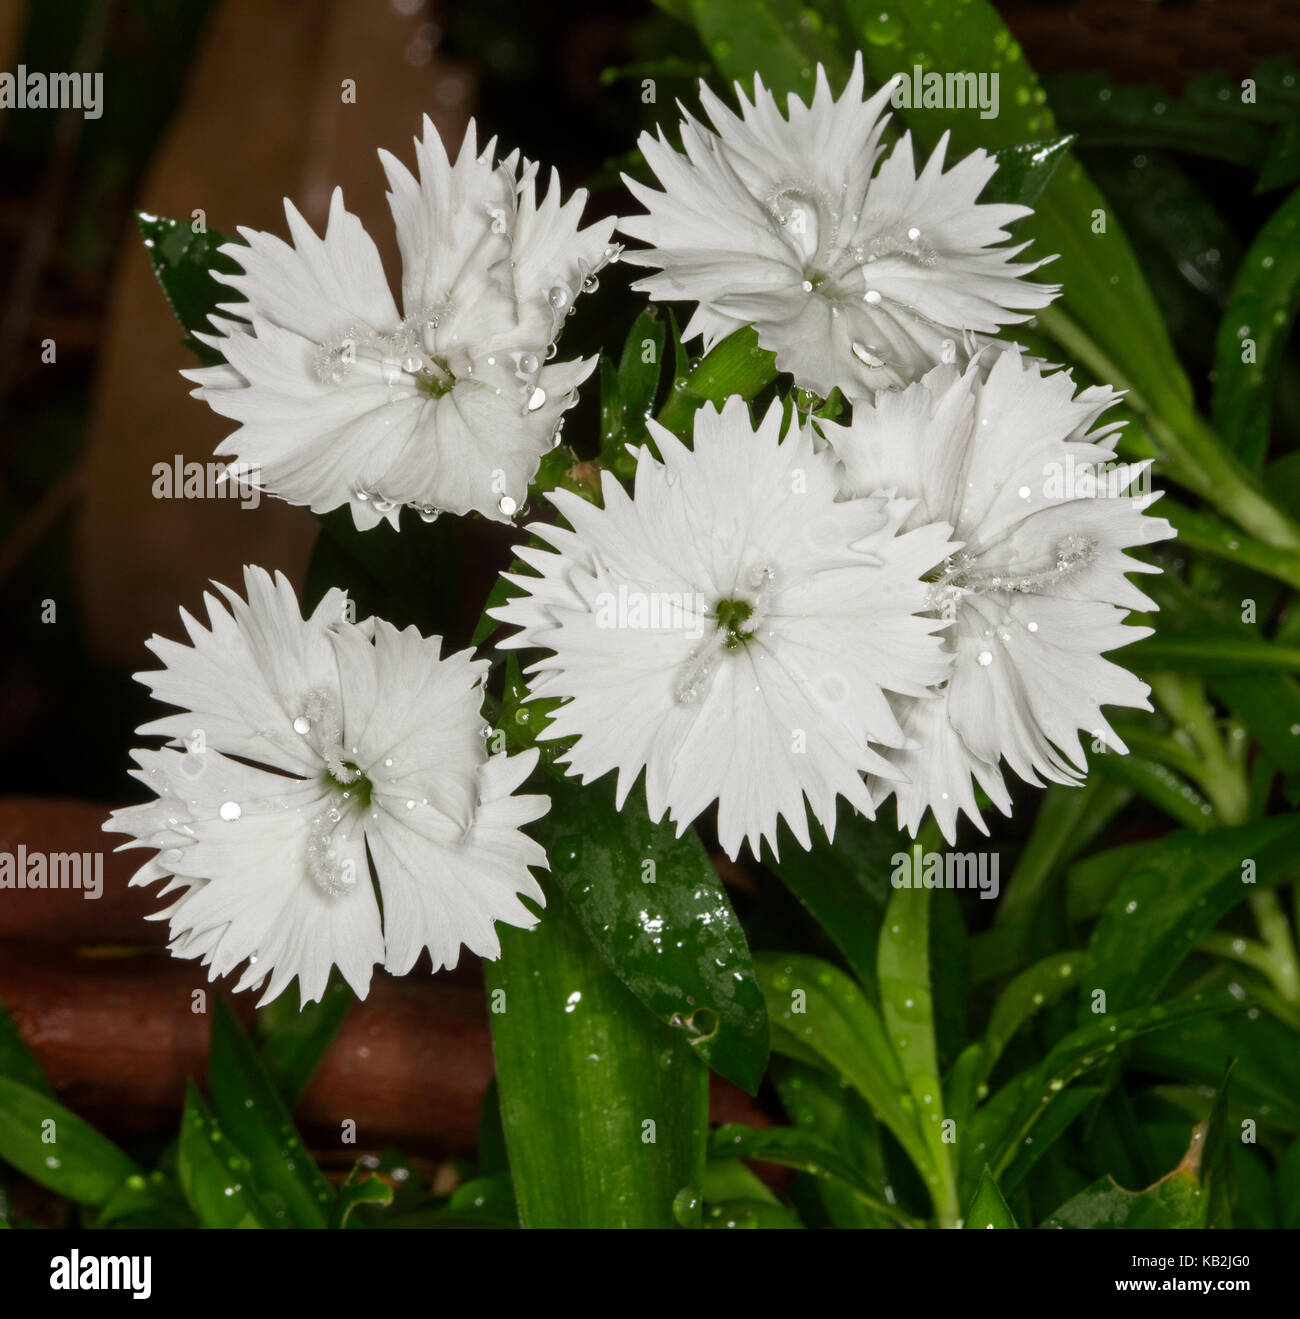 Cluster of  white flowers of Dianthus barbatus with raindrops on frilly edged petals against background of emerald green leaves Stock Photo